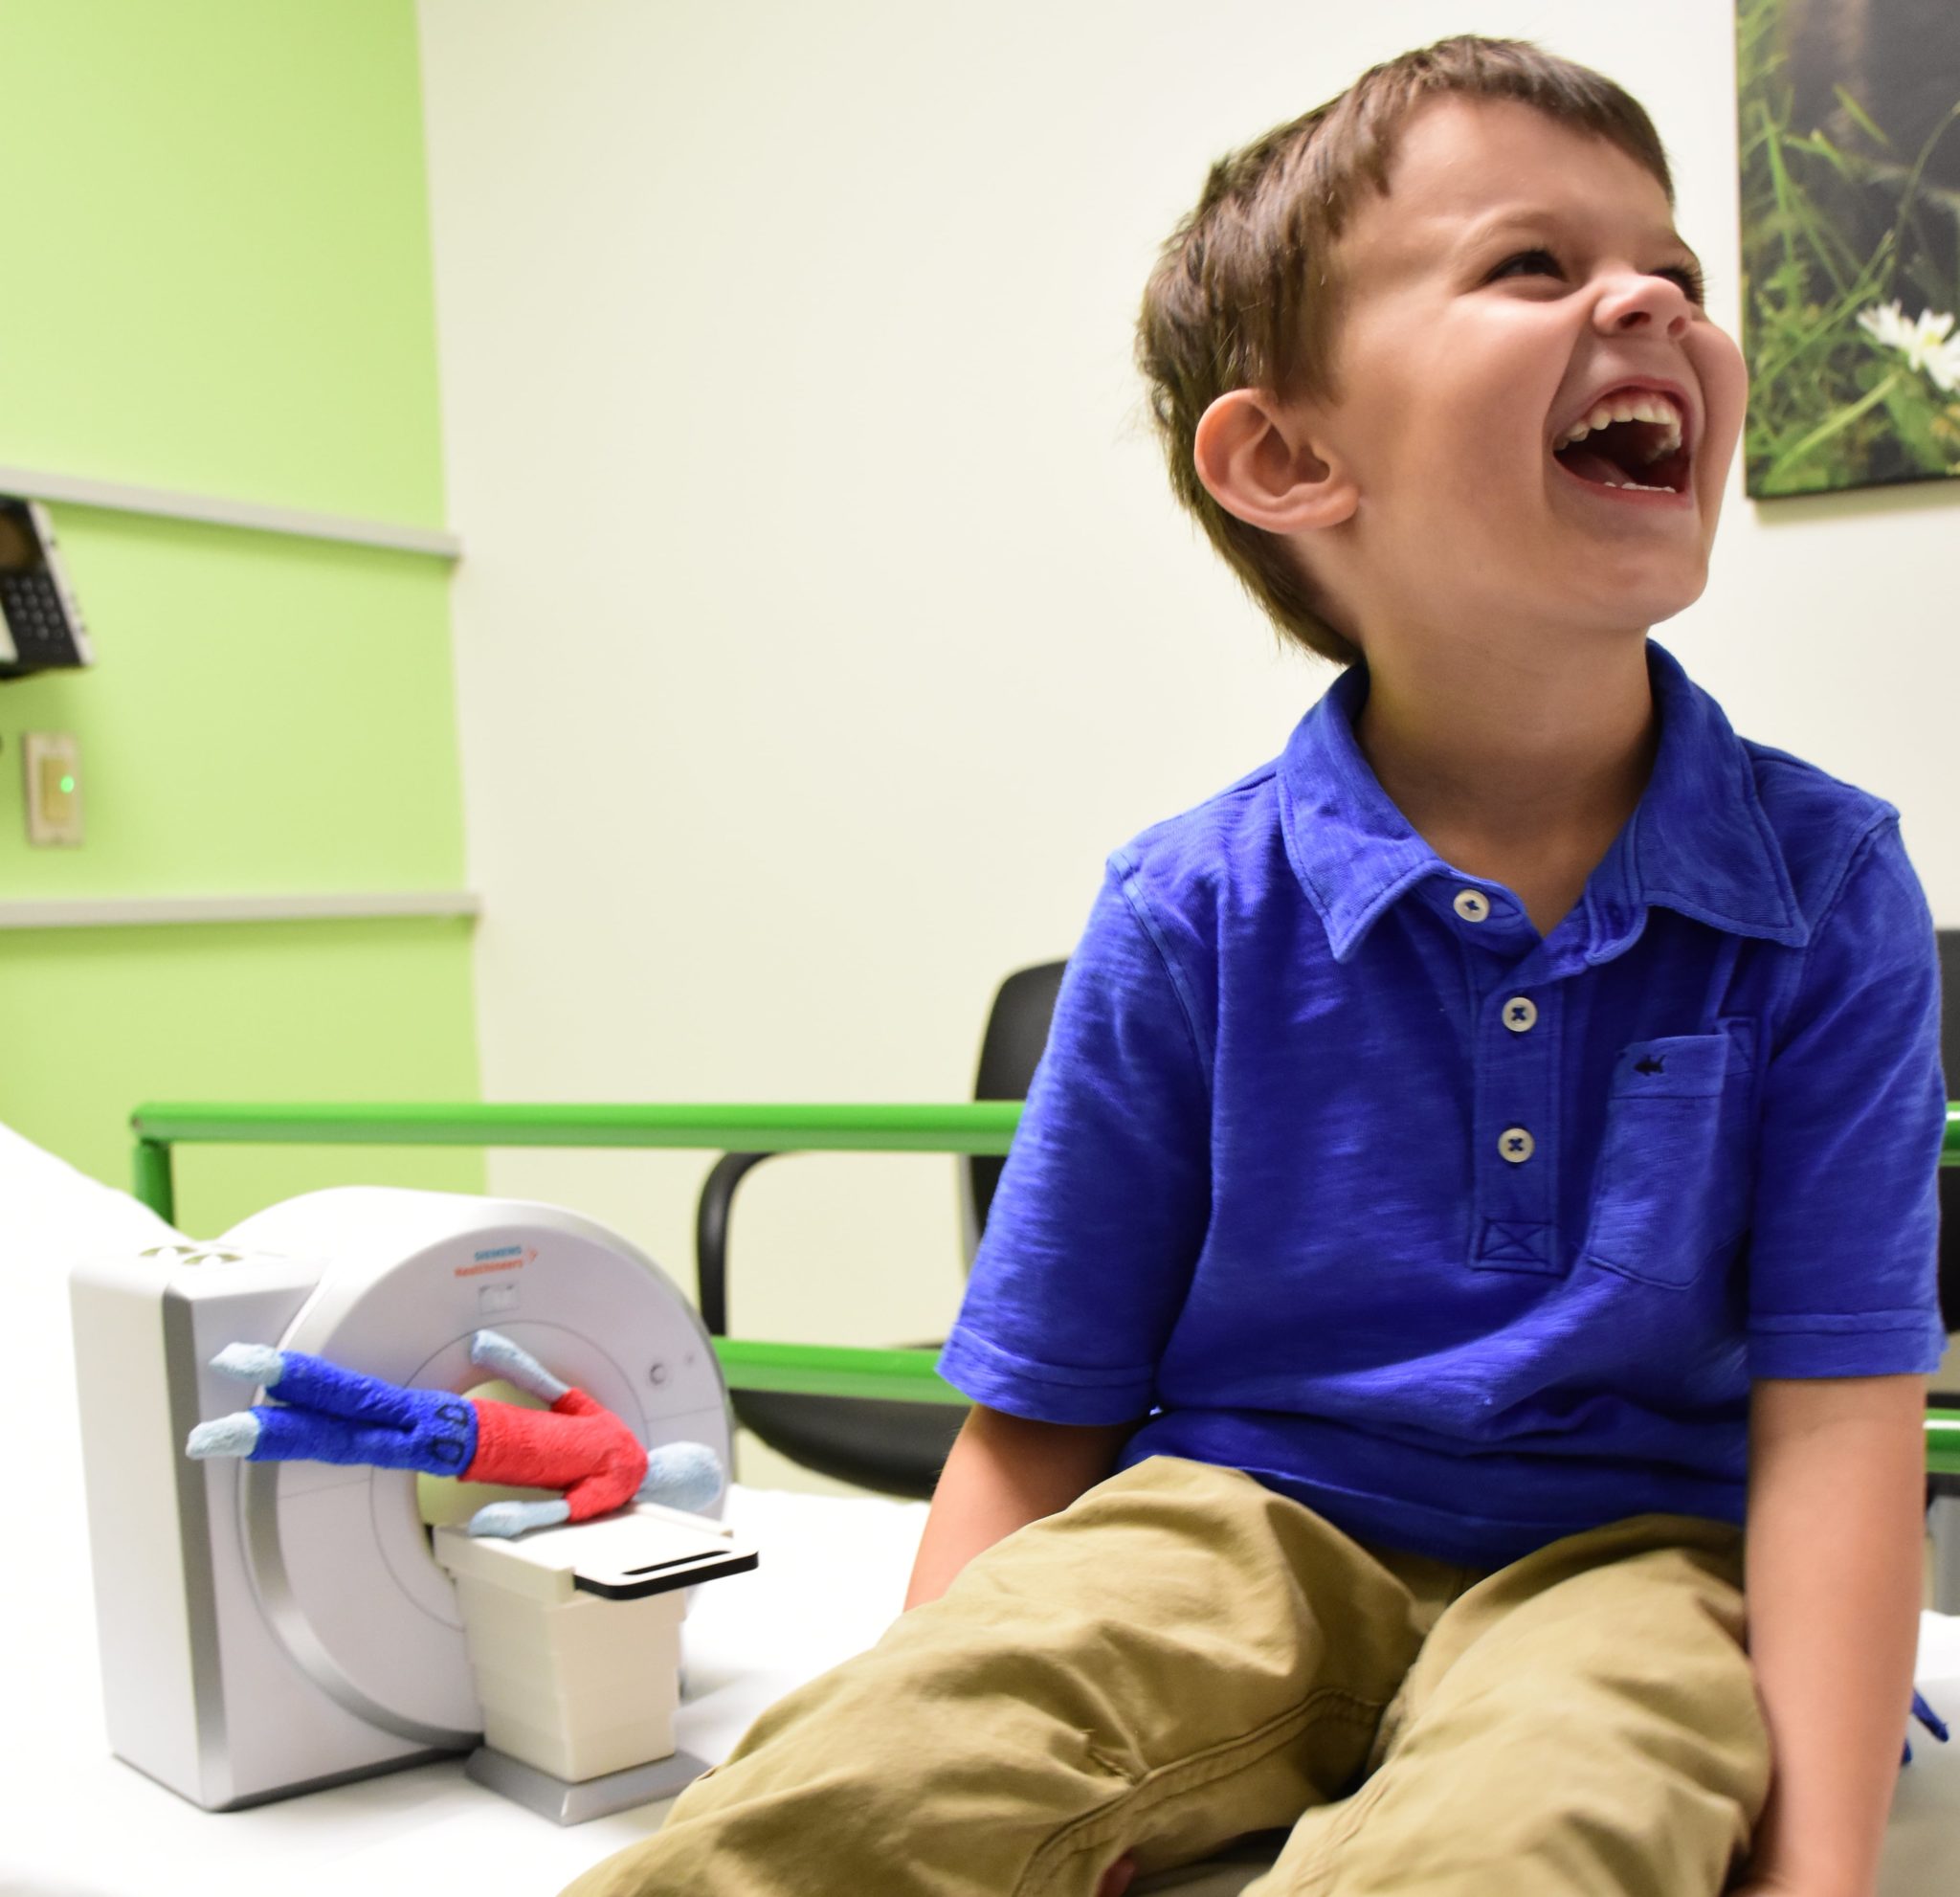 A boy laughs while sitting in a medical waiting room